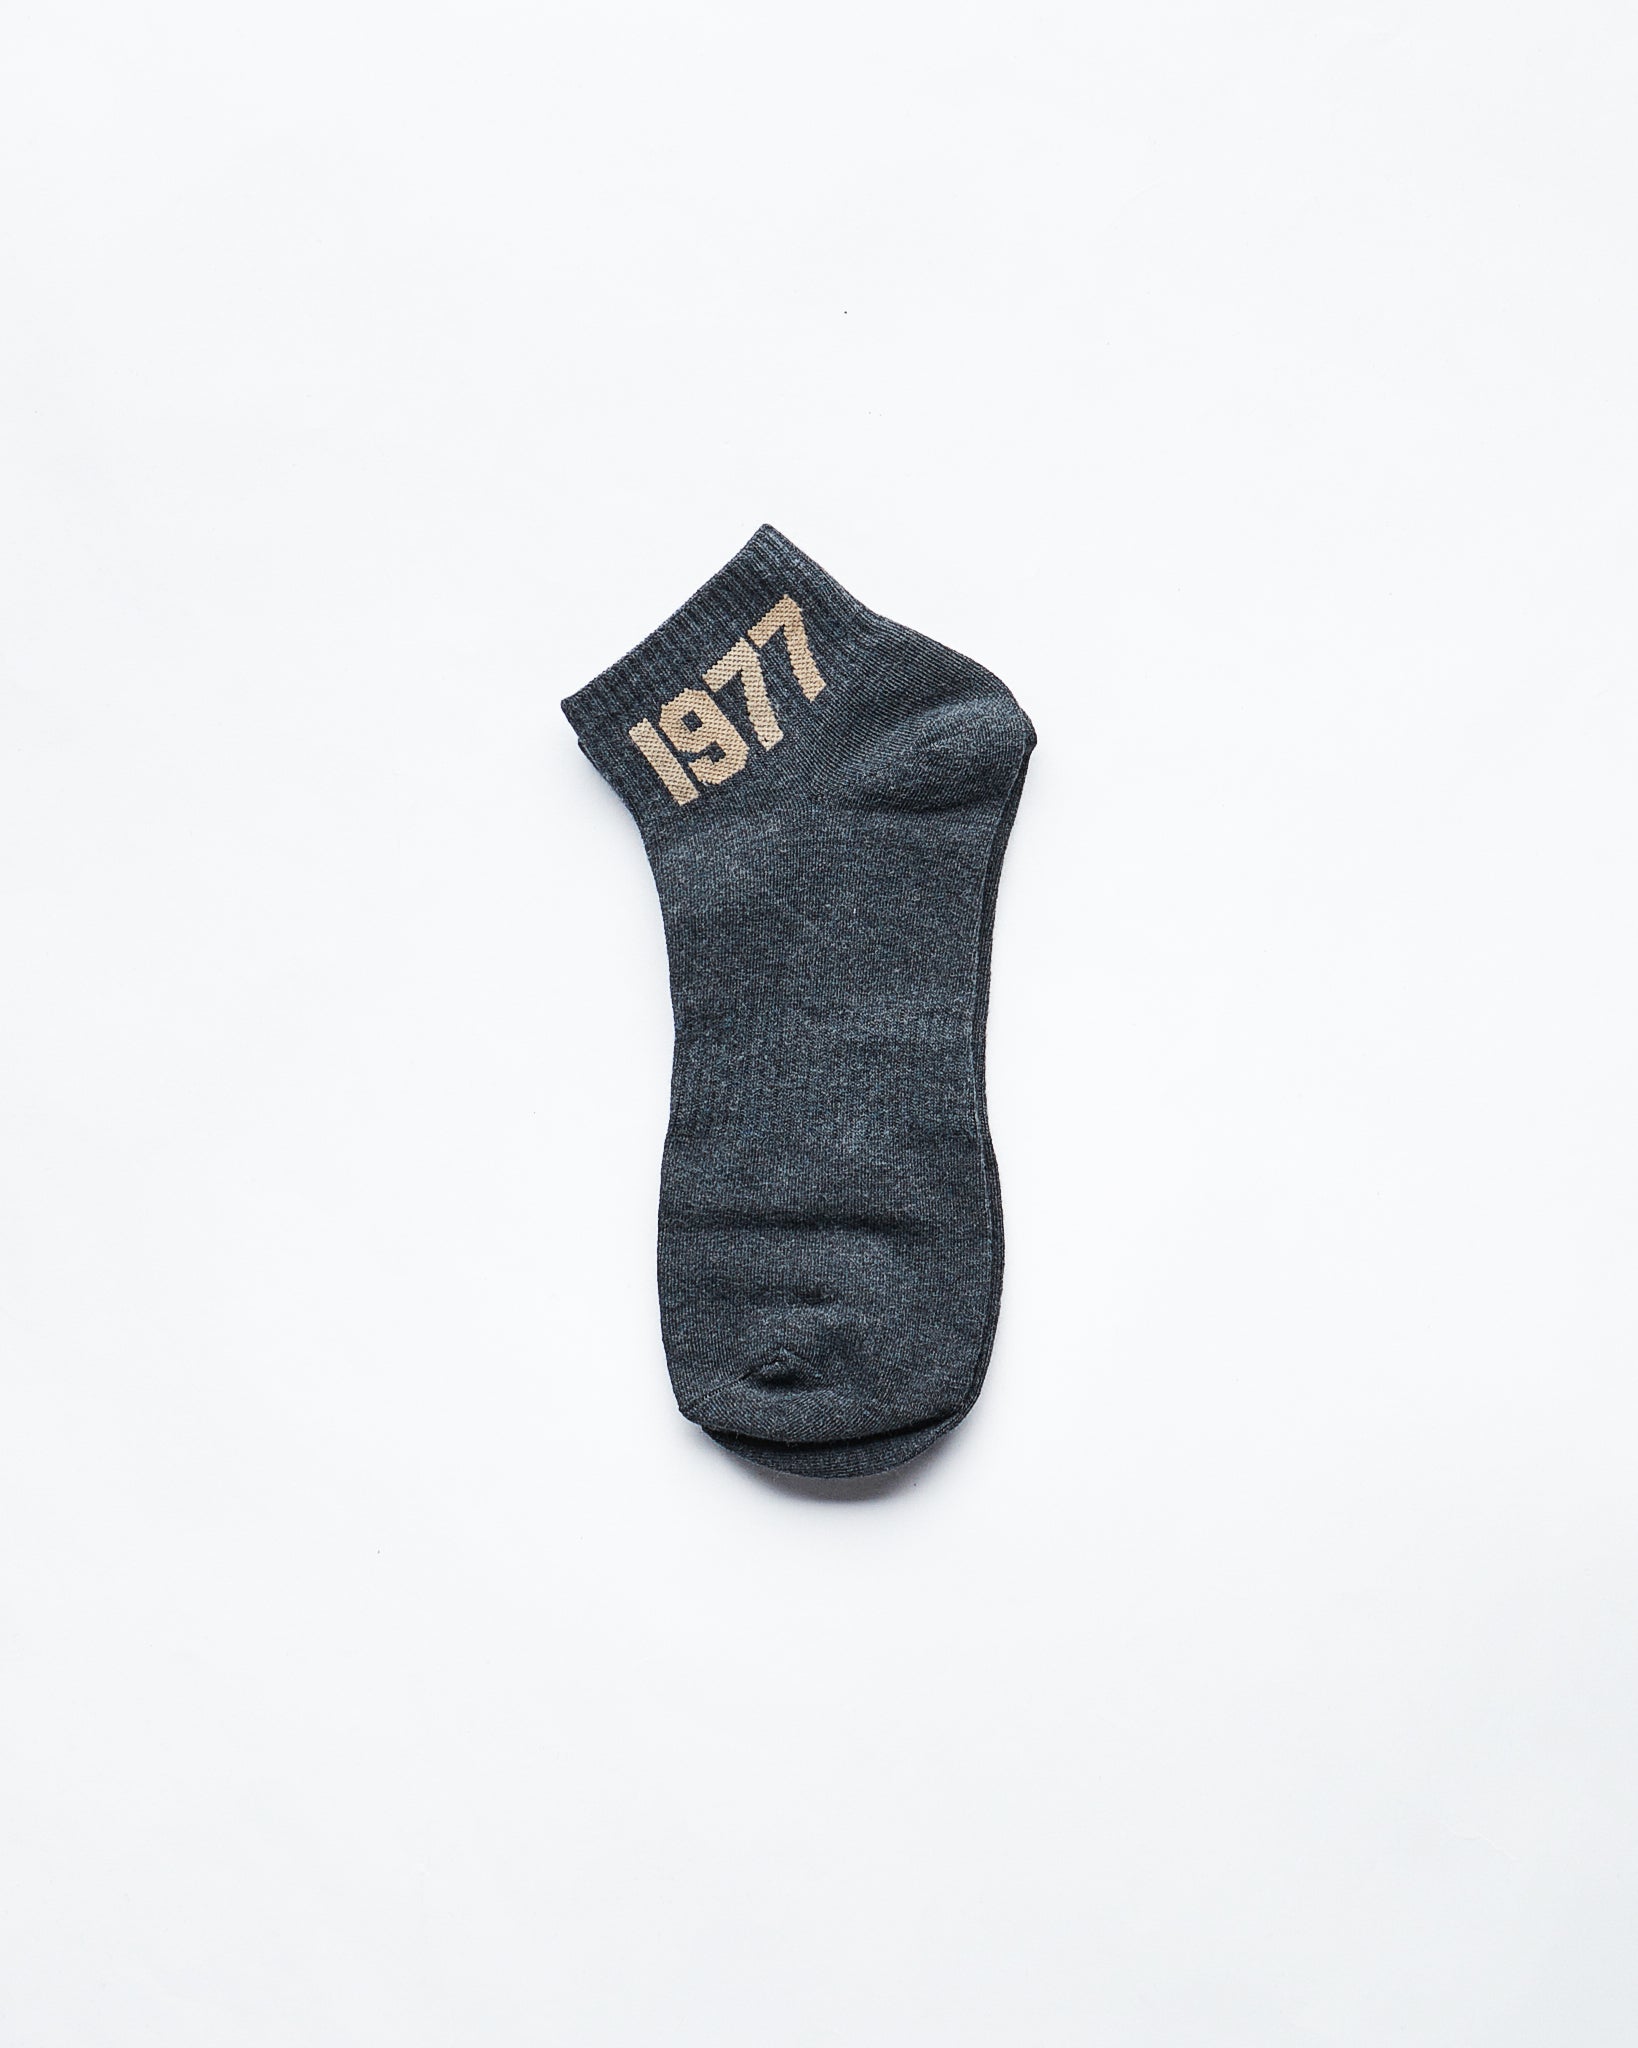 MOI OUTFIT-1977 5 Pairs Quarter Socks 13.90